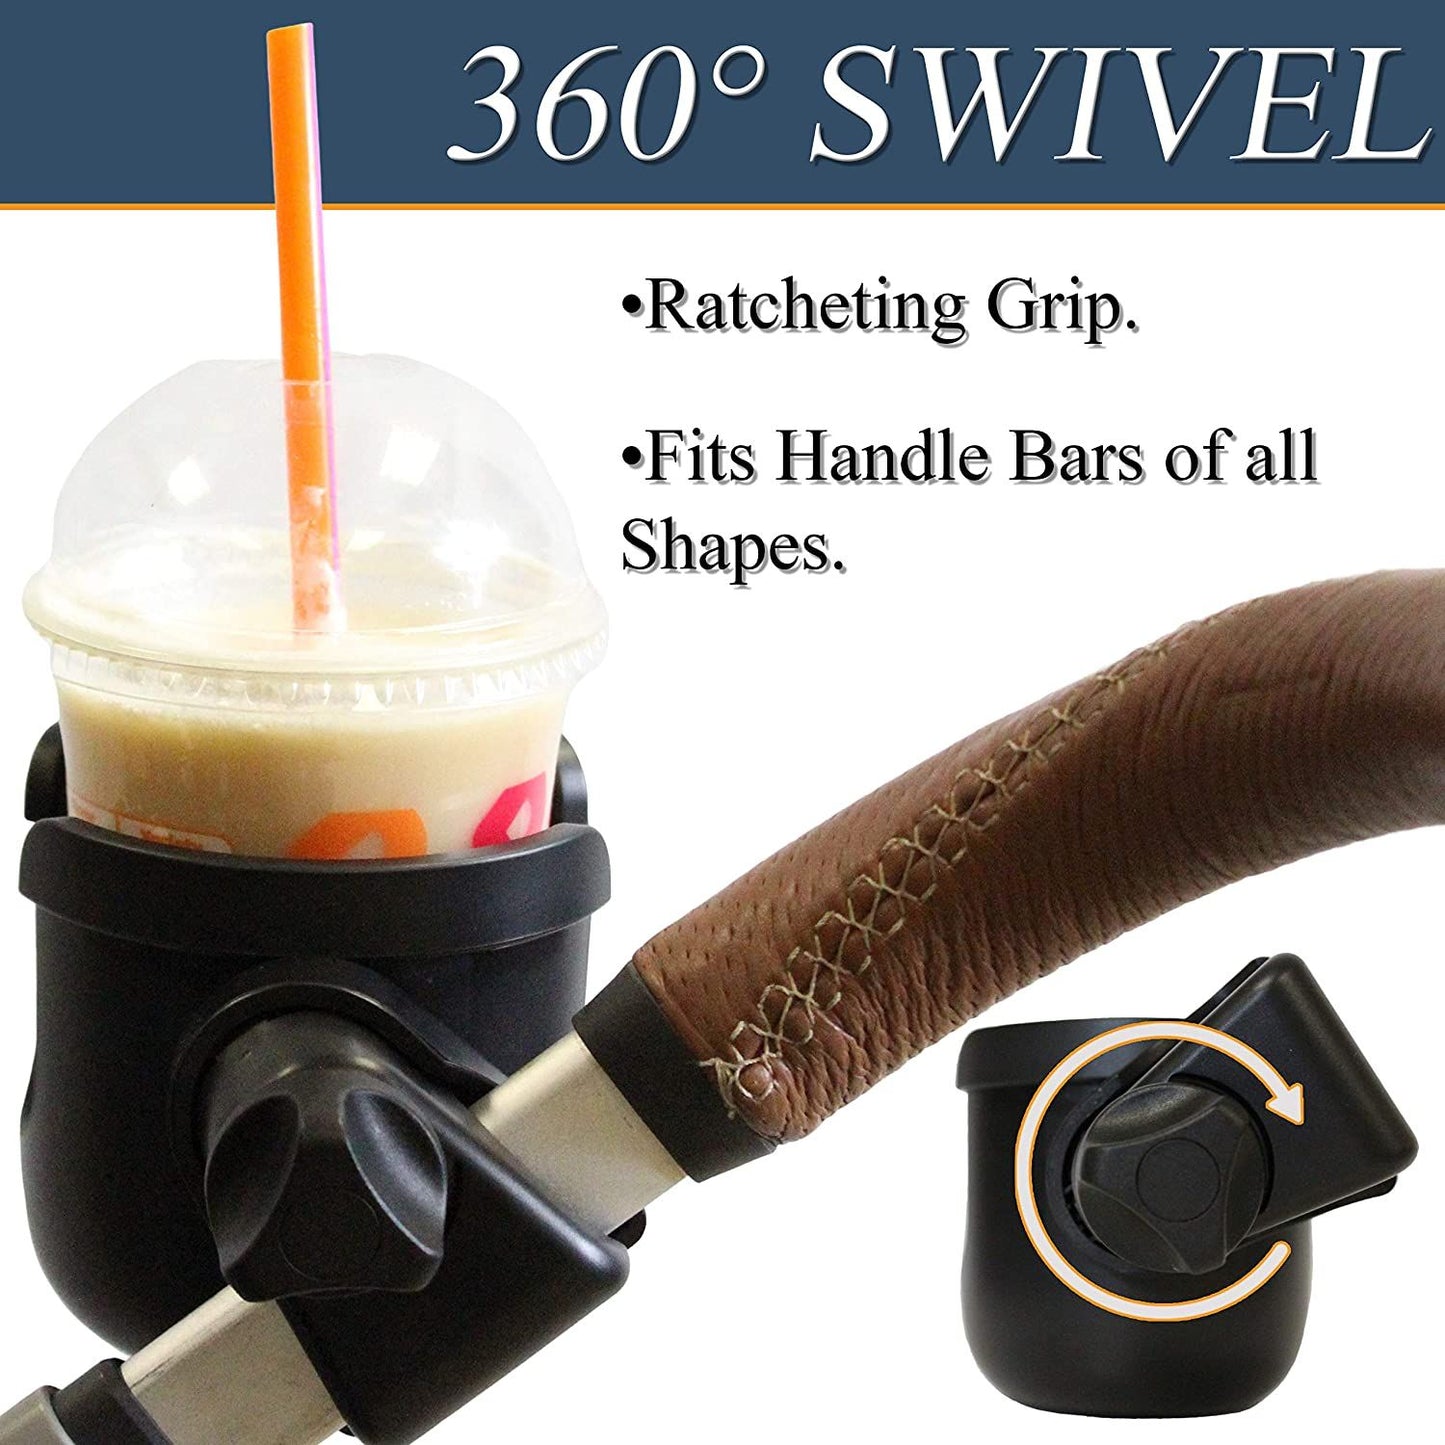 W4W Universal Stroller Cup Holder - W4W Products 